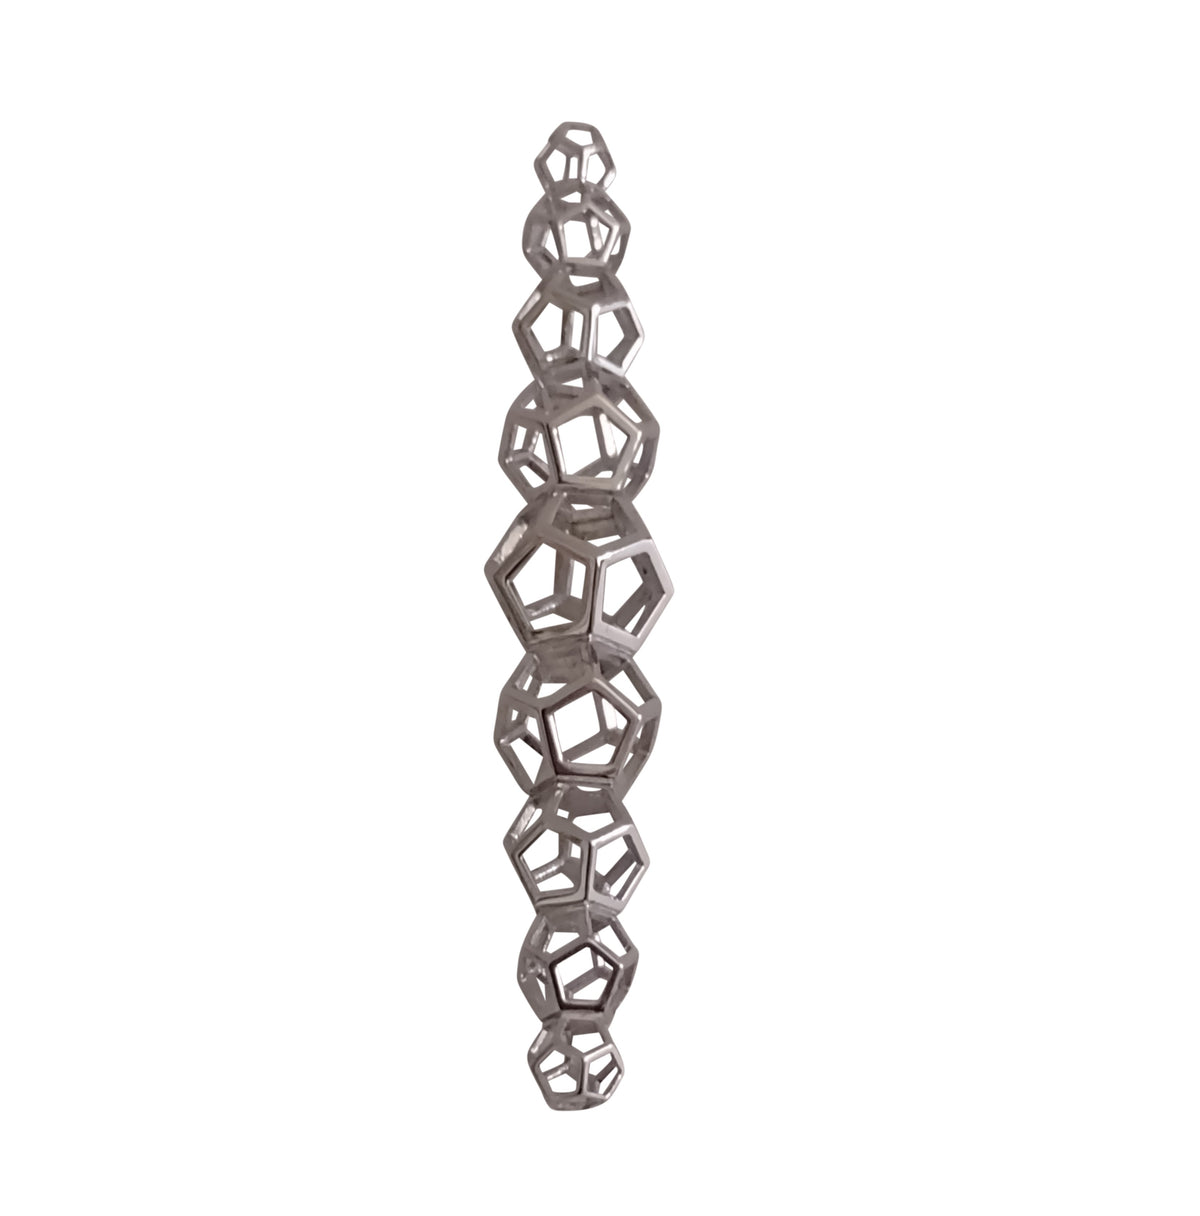 DOUBLE DODECAHEDRON PILLAR_Rhodium Plated Brass